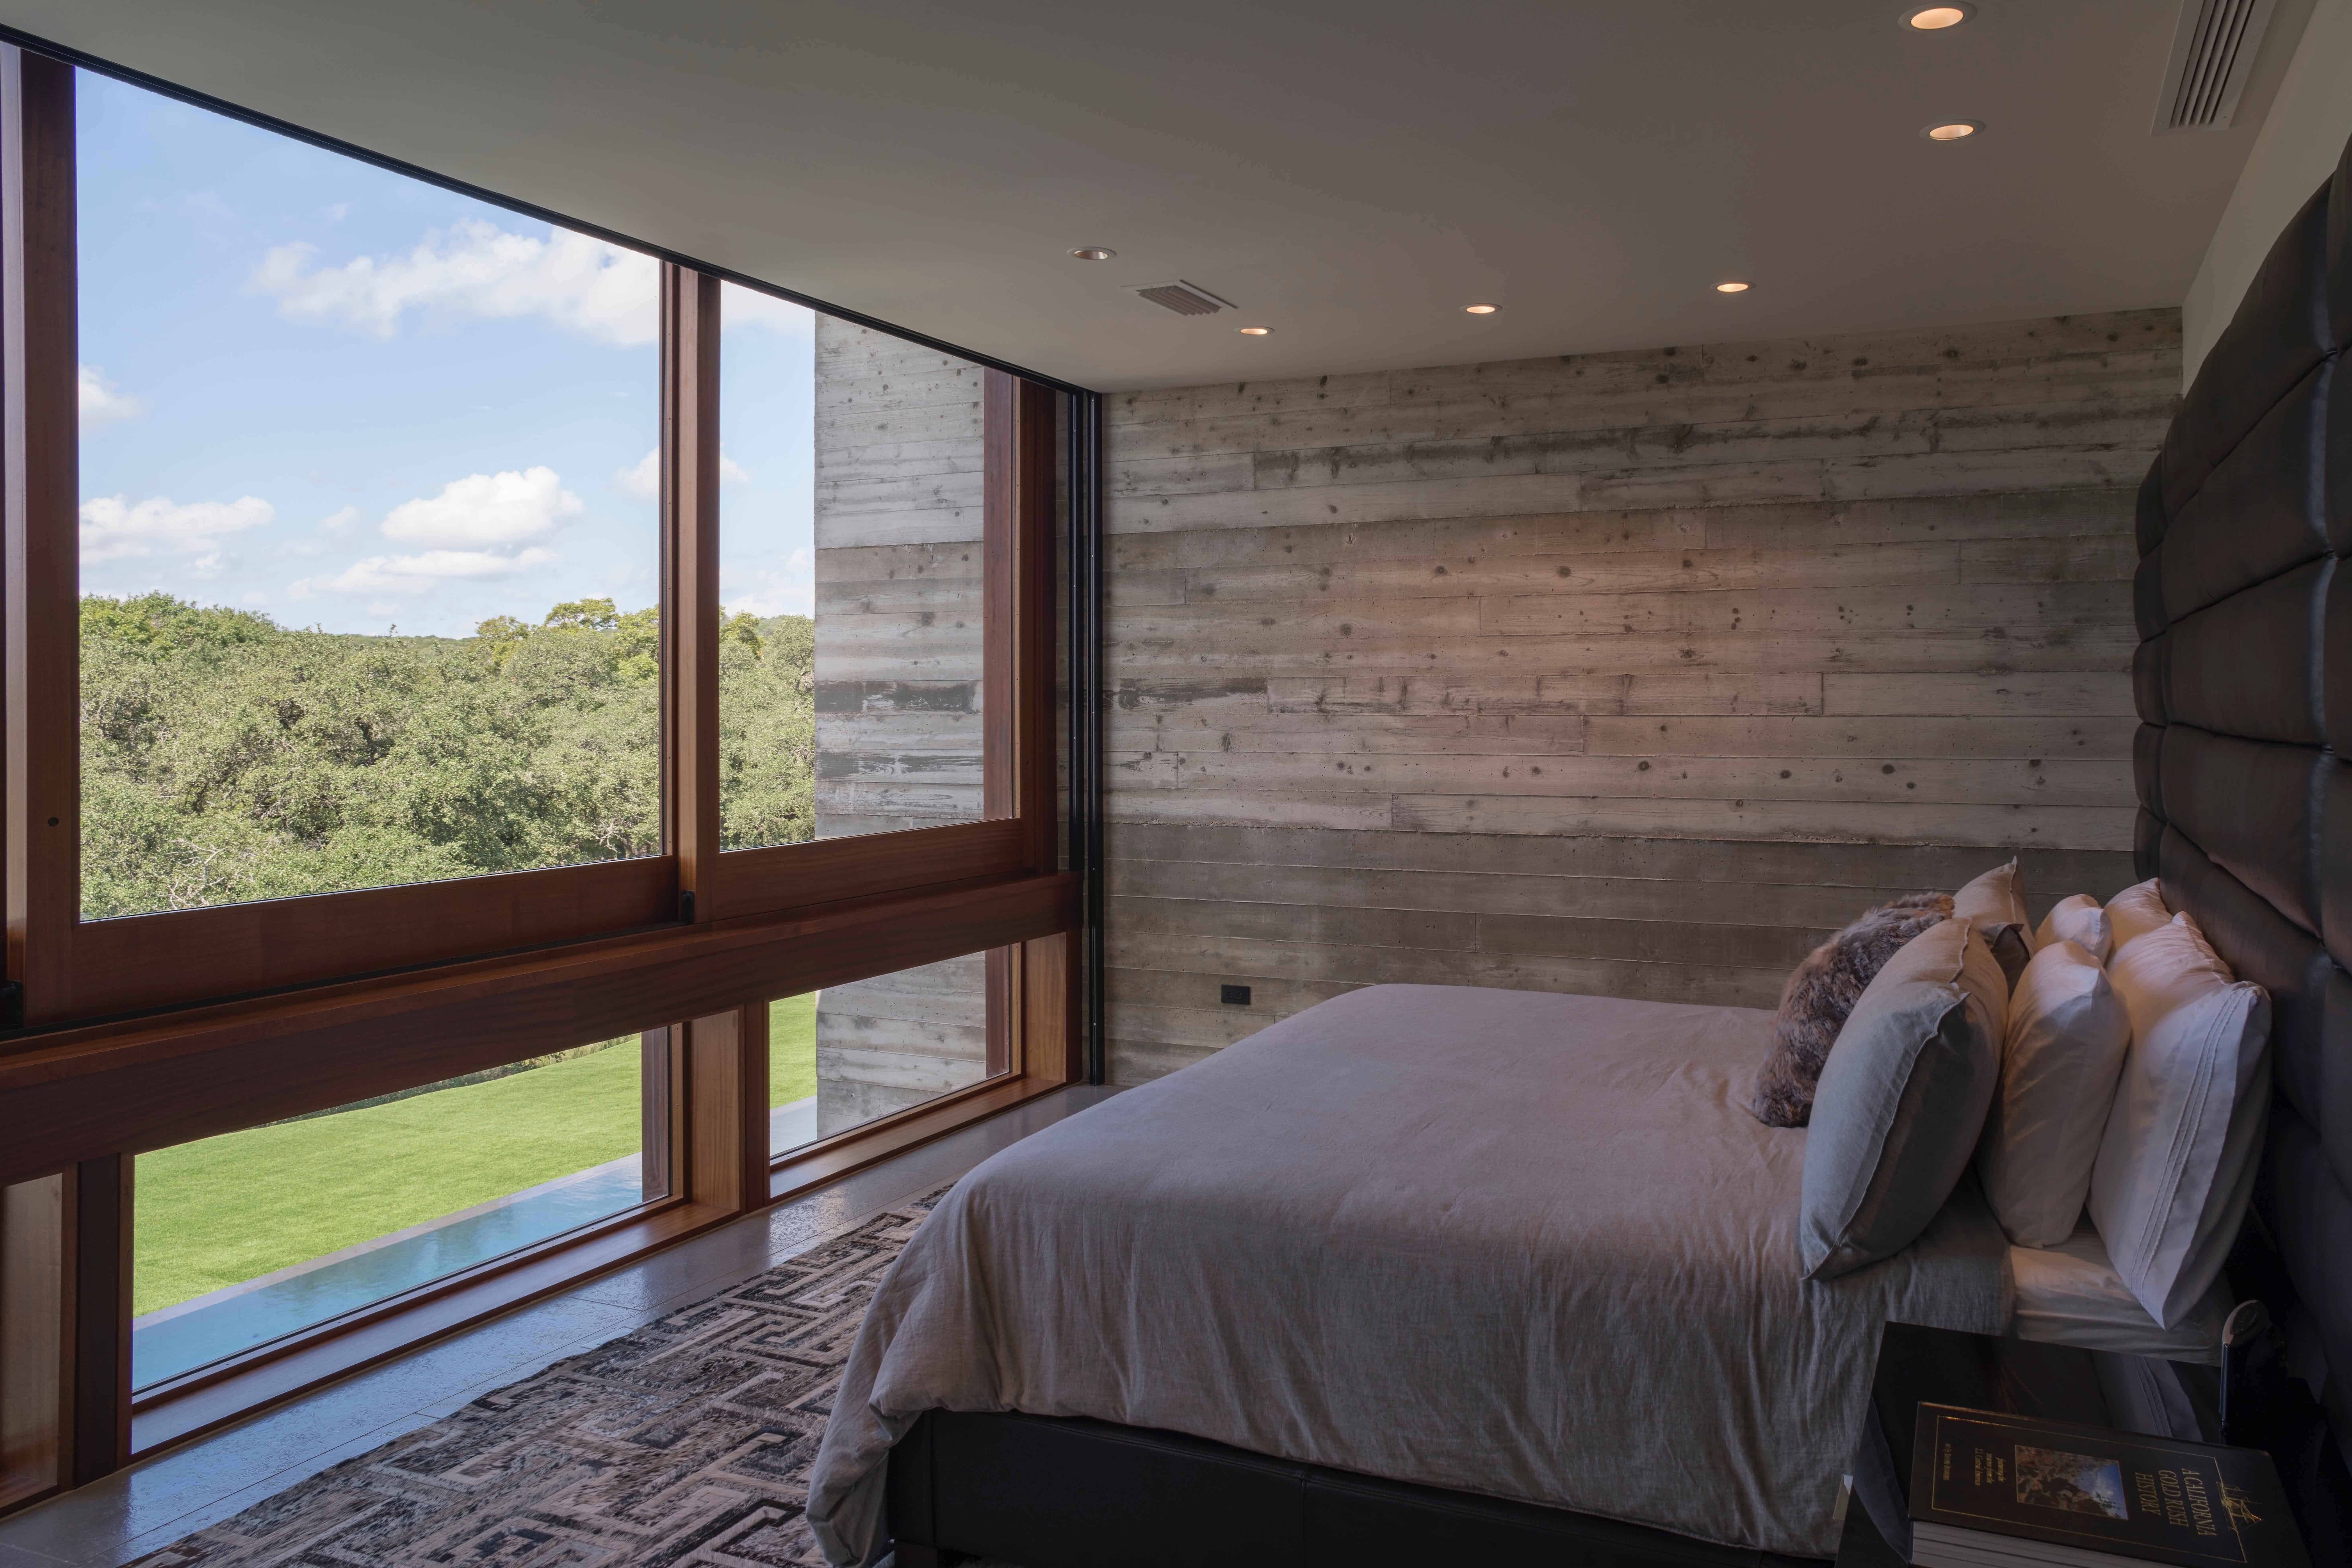 Master Bedroom with large picture window overlooking Texas Hill Country